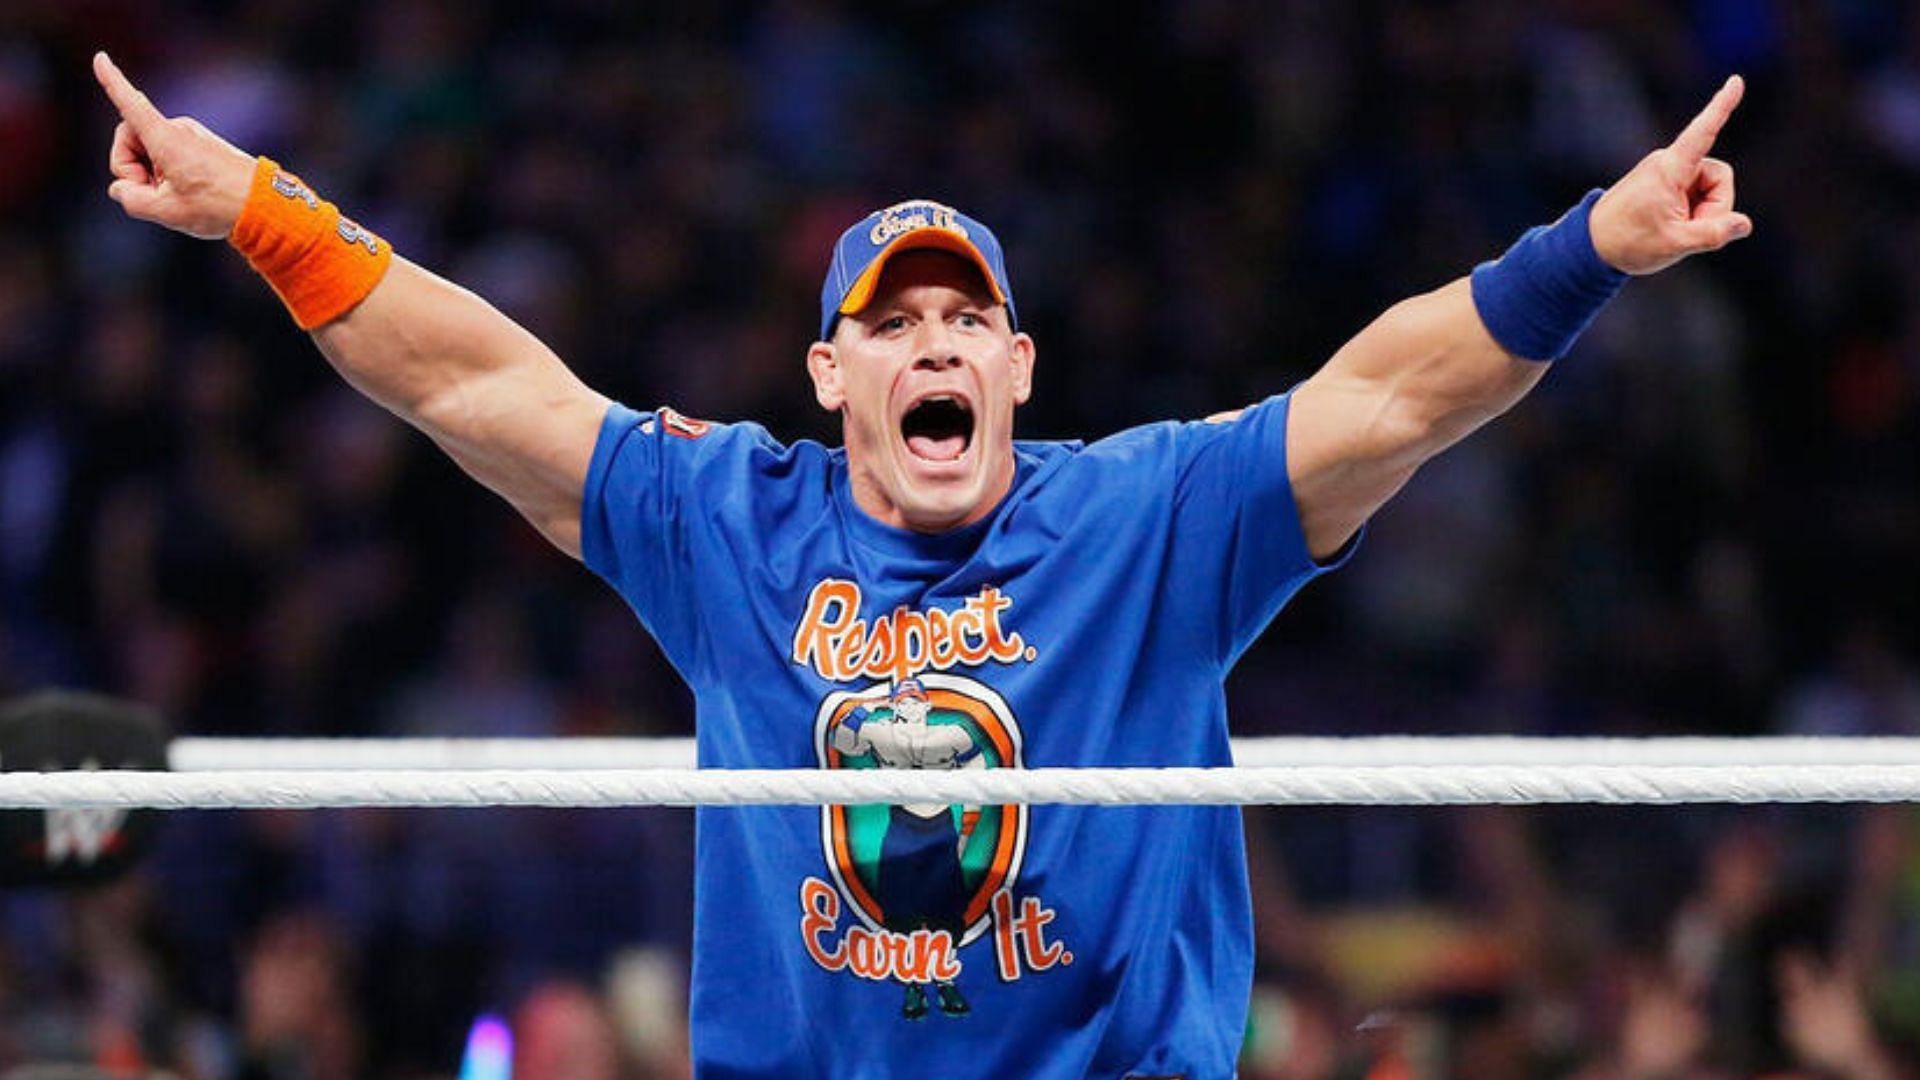 Cena is a legend of the professional wrestling business.